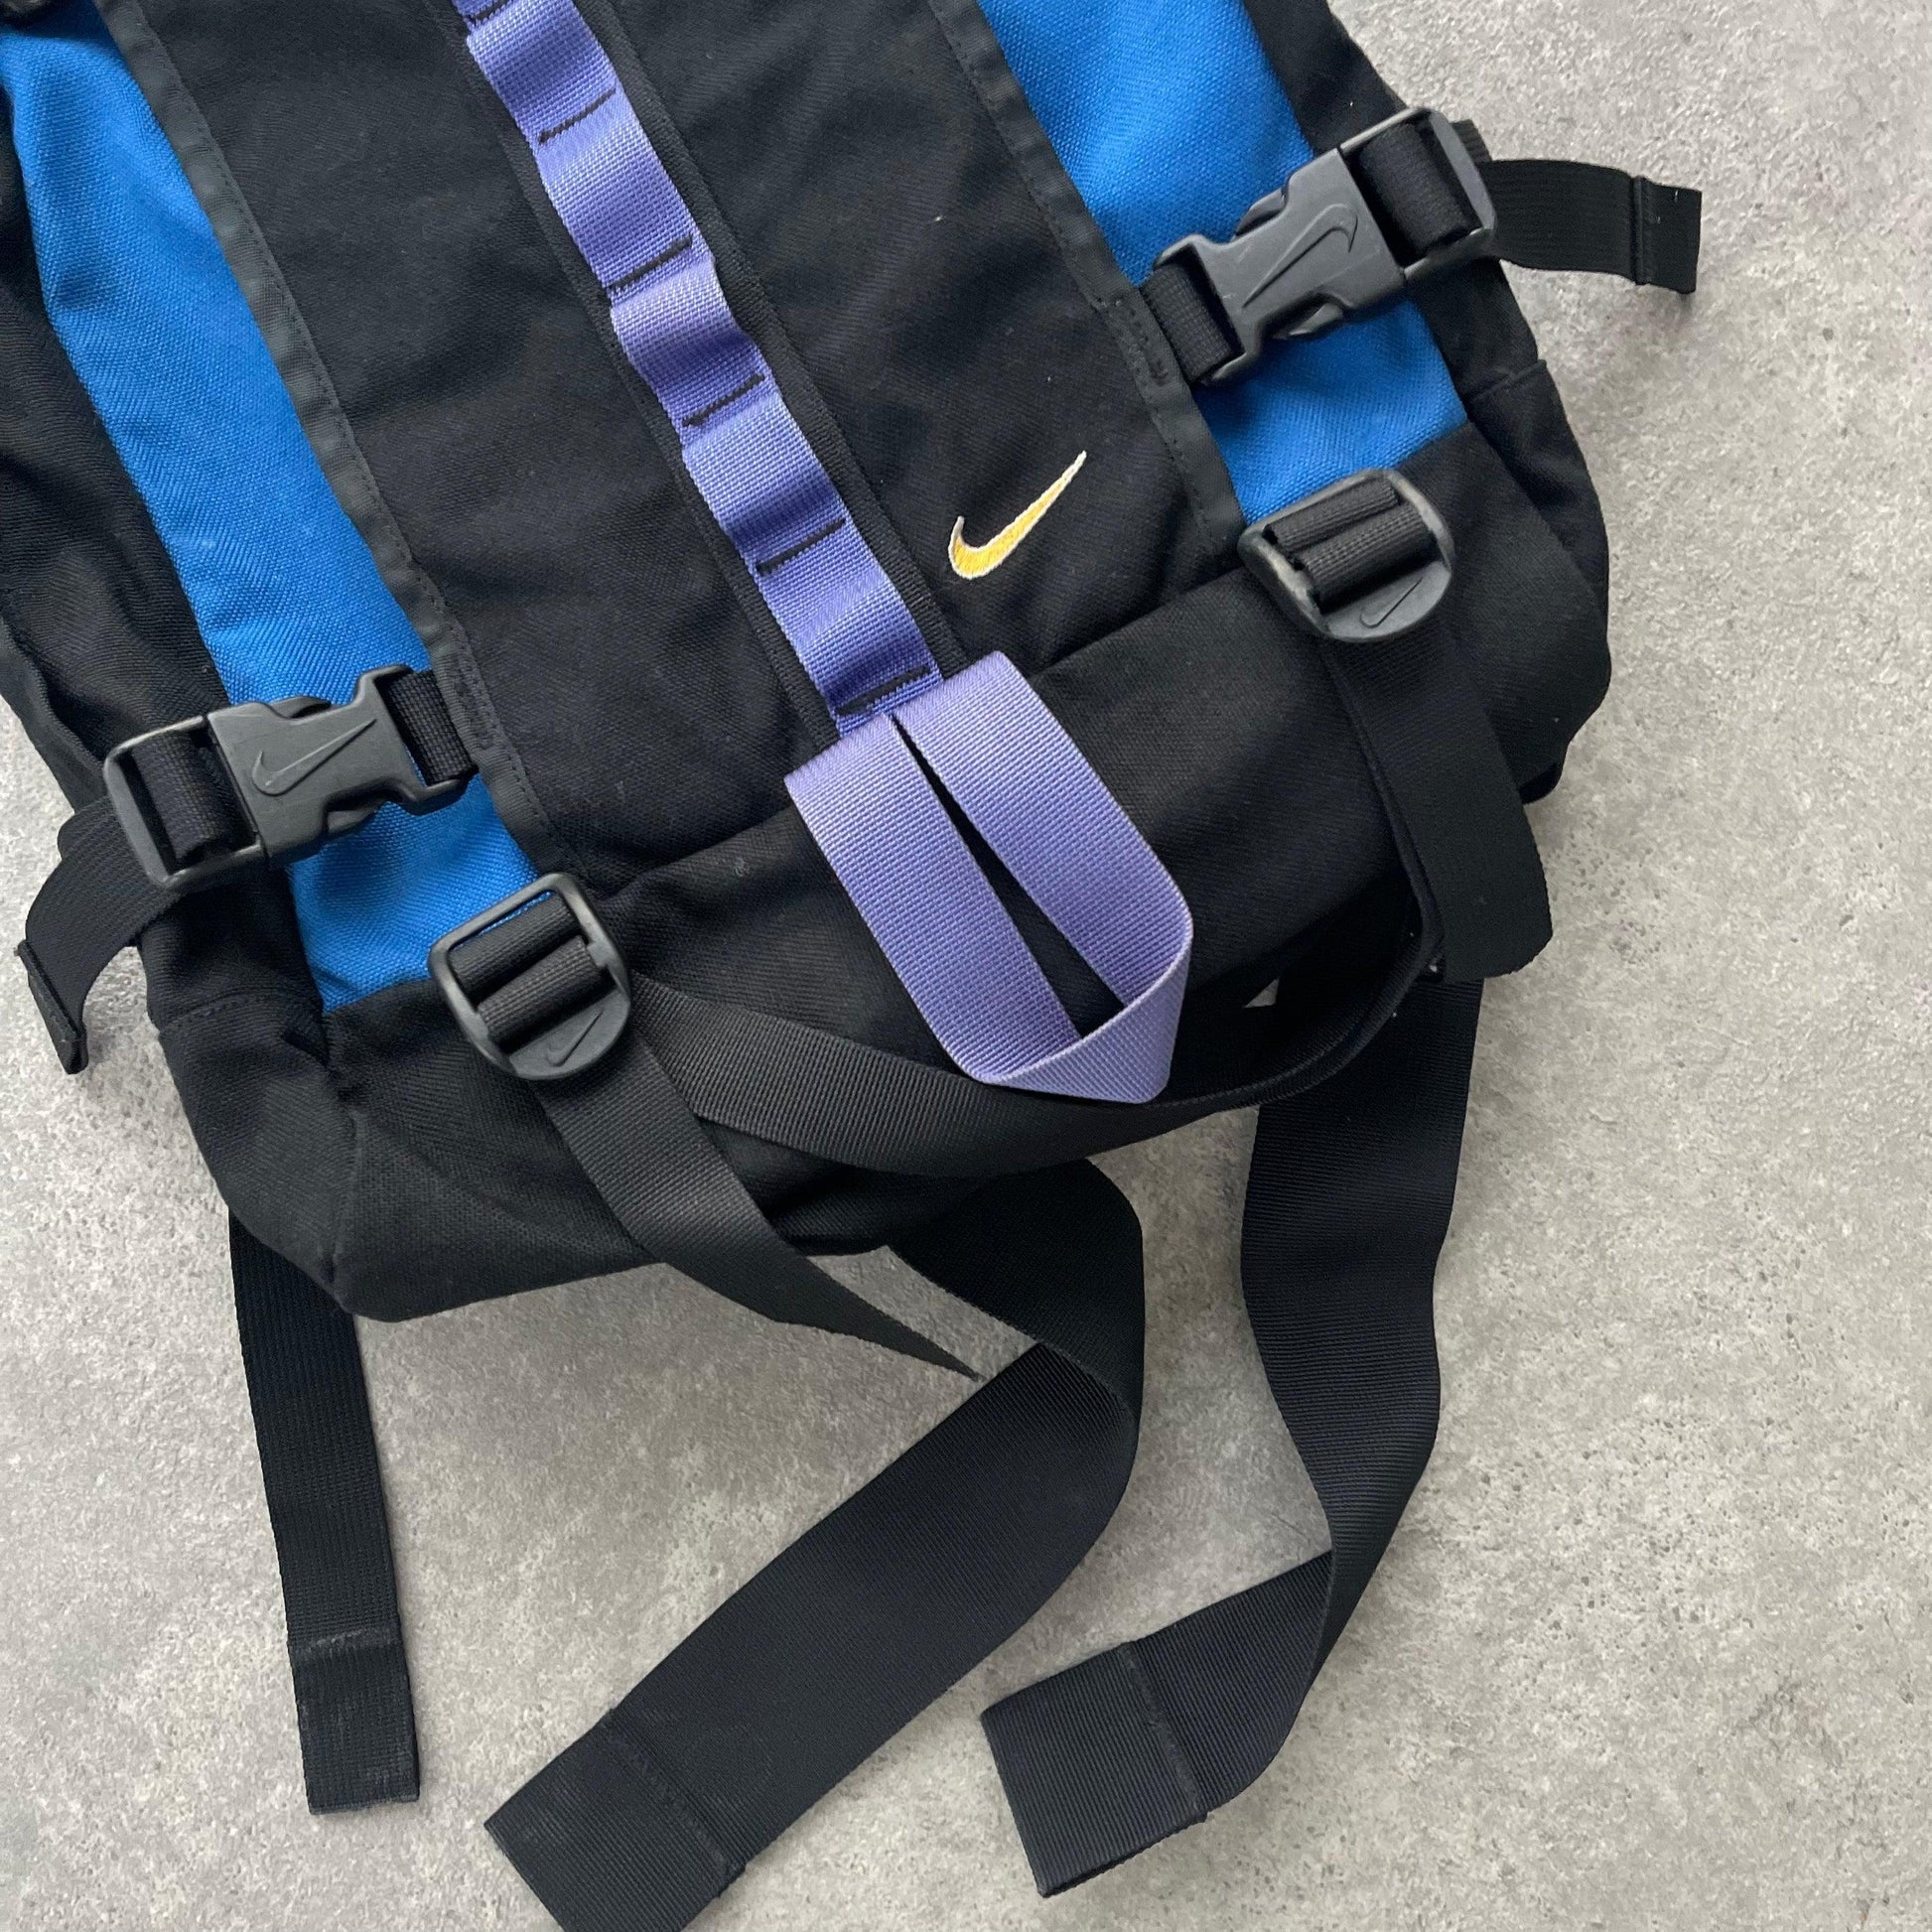 Nike ACG 1990s Karst 25L backpack (18”x12”x10”) - Known Source